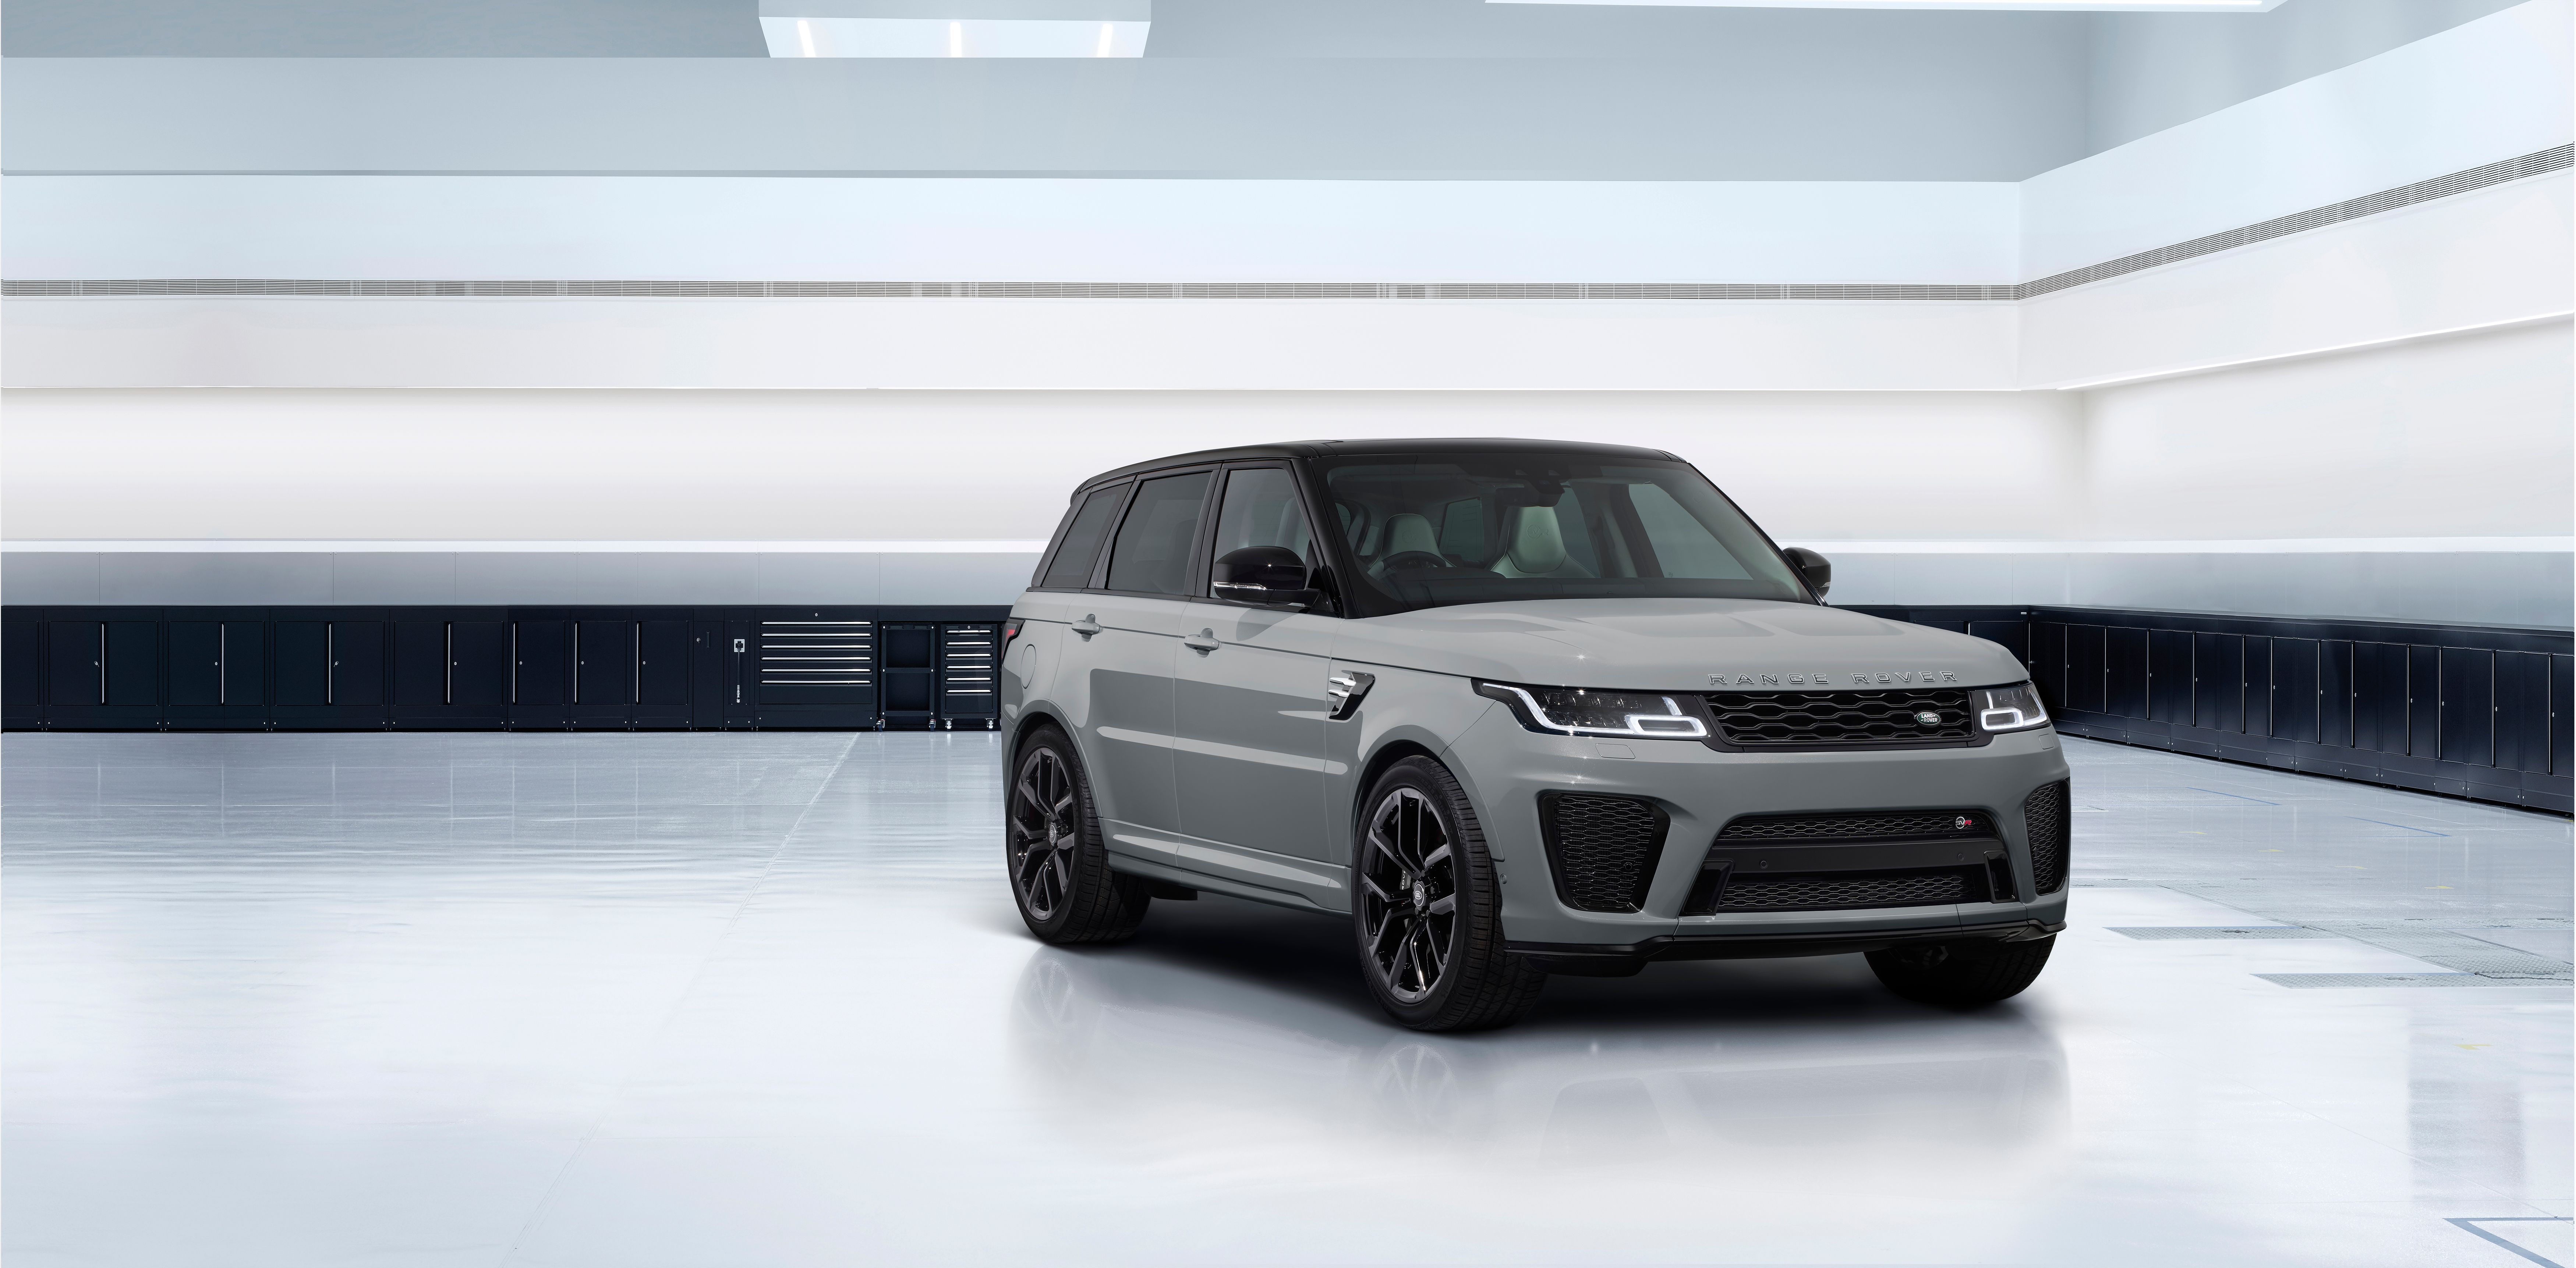 Land Rover Range Rover SVR Ultimate Edition Front 3.5 View In Gray